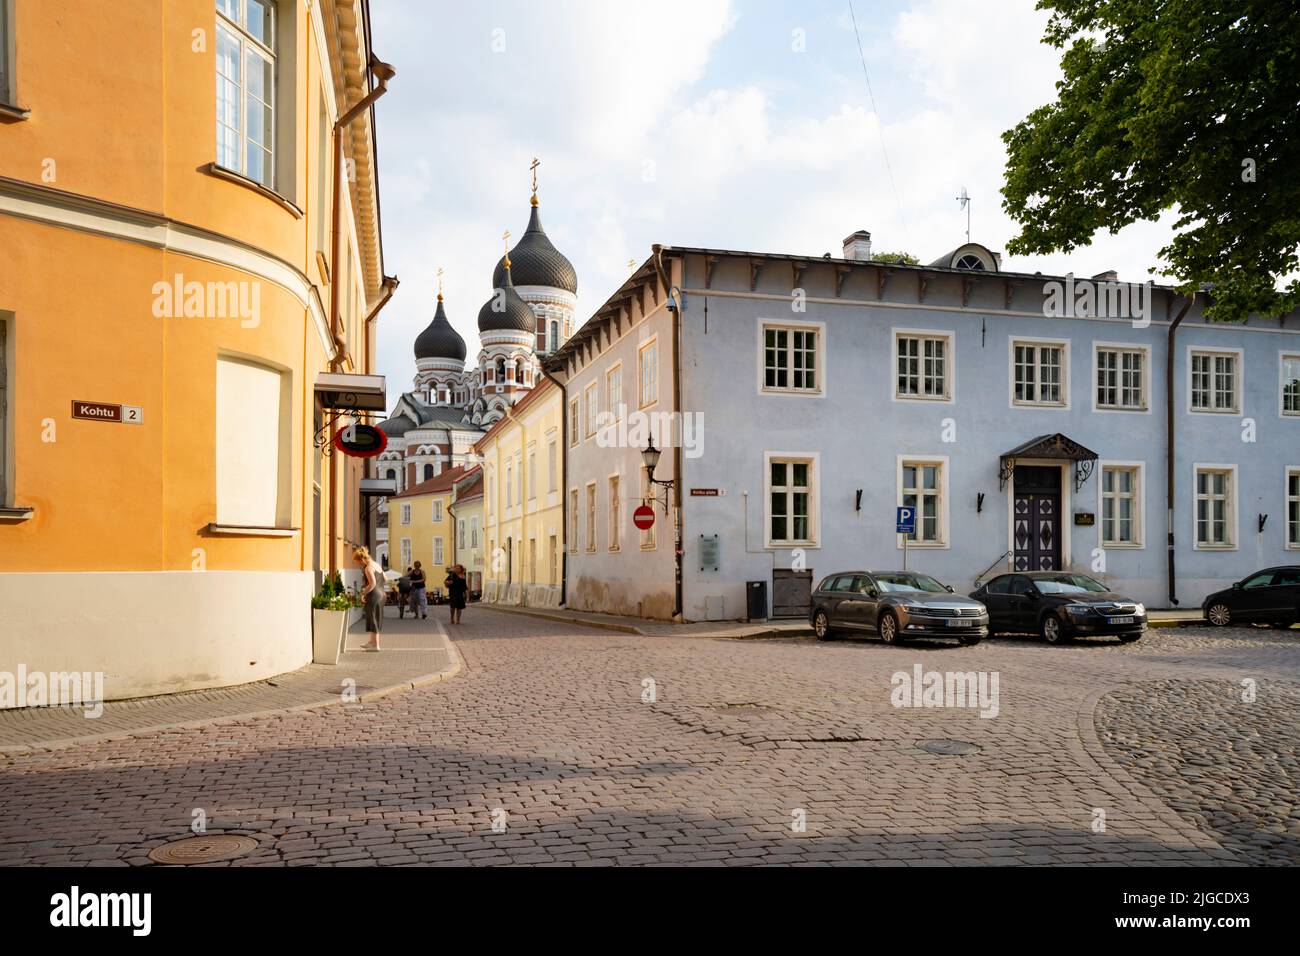 Tallinn, Estonia. July 2022.  The domes of the Alexander Nevsky Cathedral among the houses in the historic center of the city Stock Photo